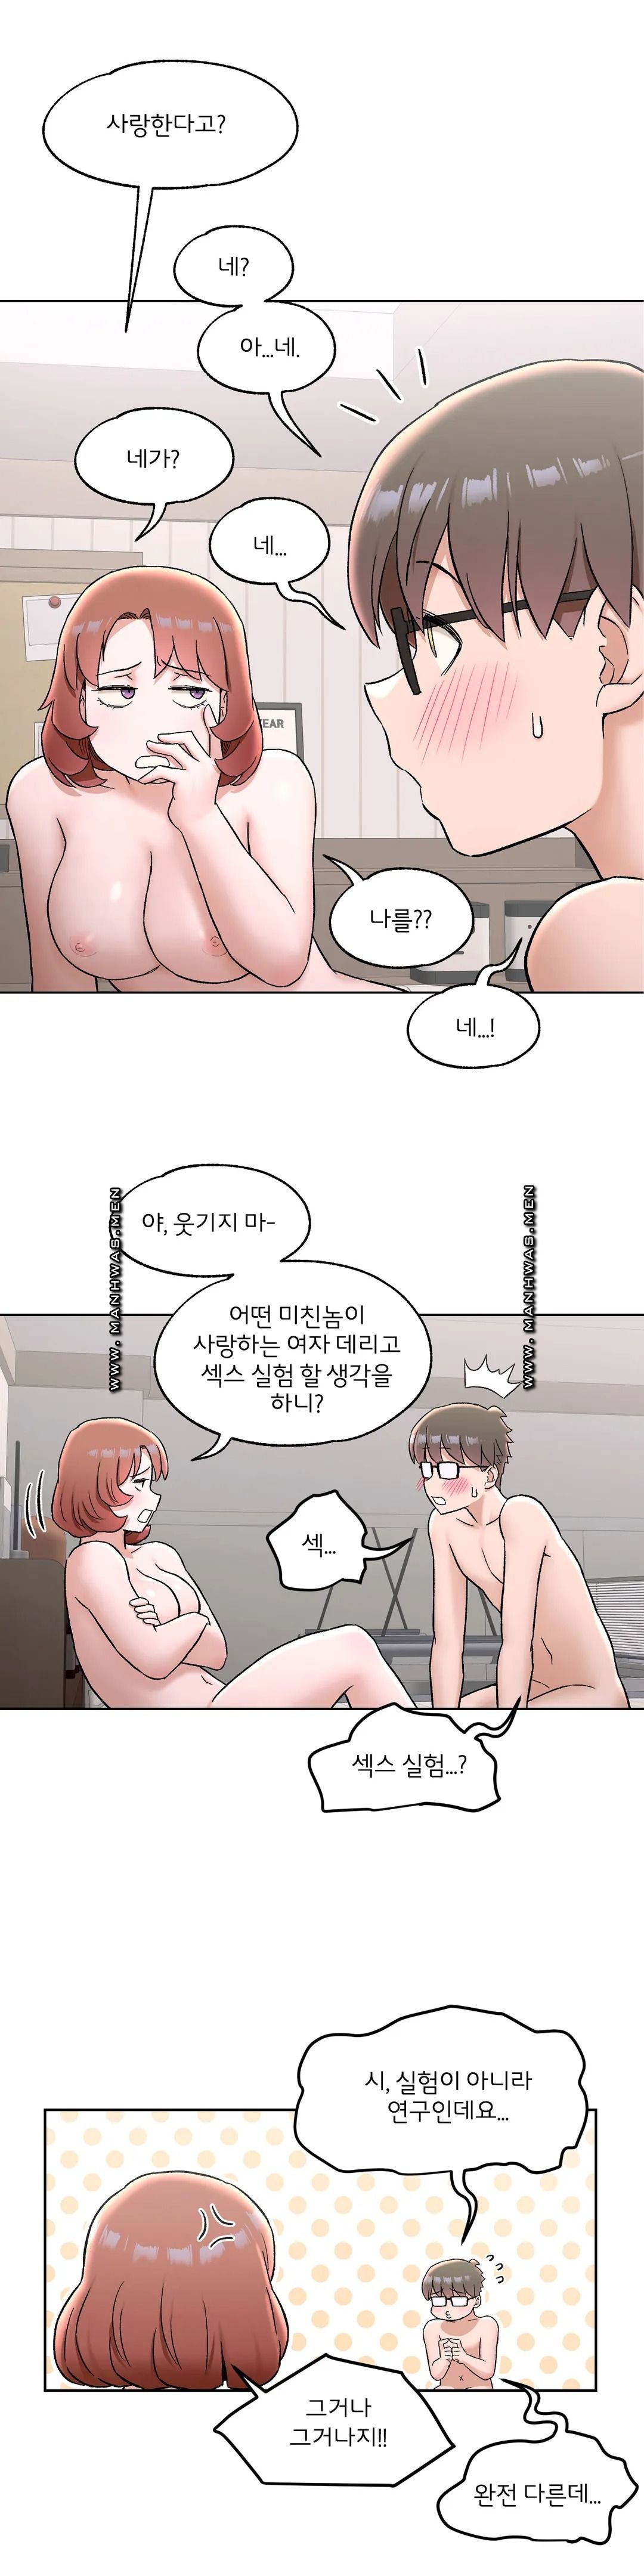 Sexercise Raw - Chapter 68 Page 3